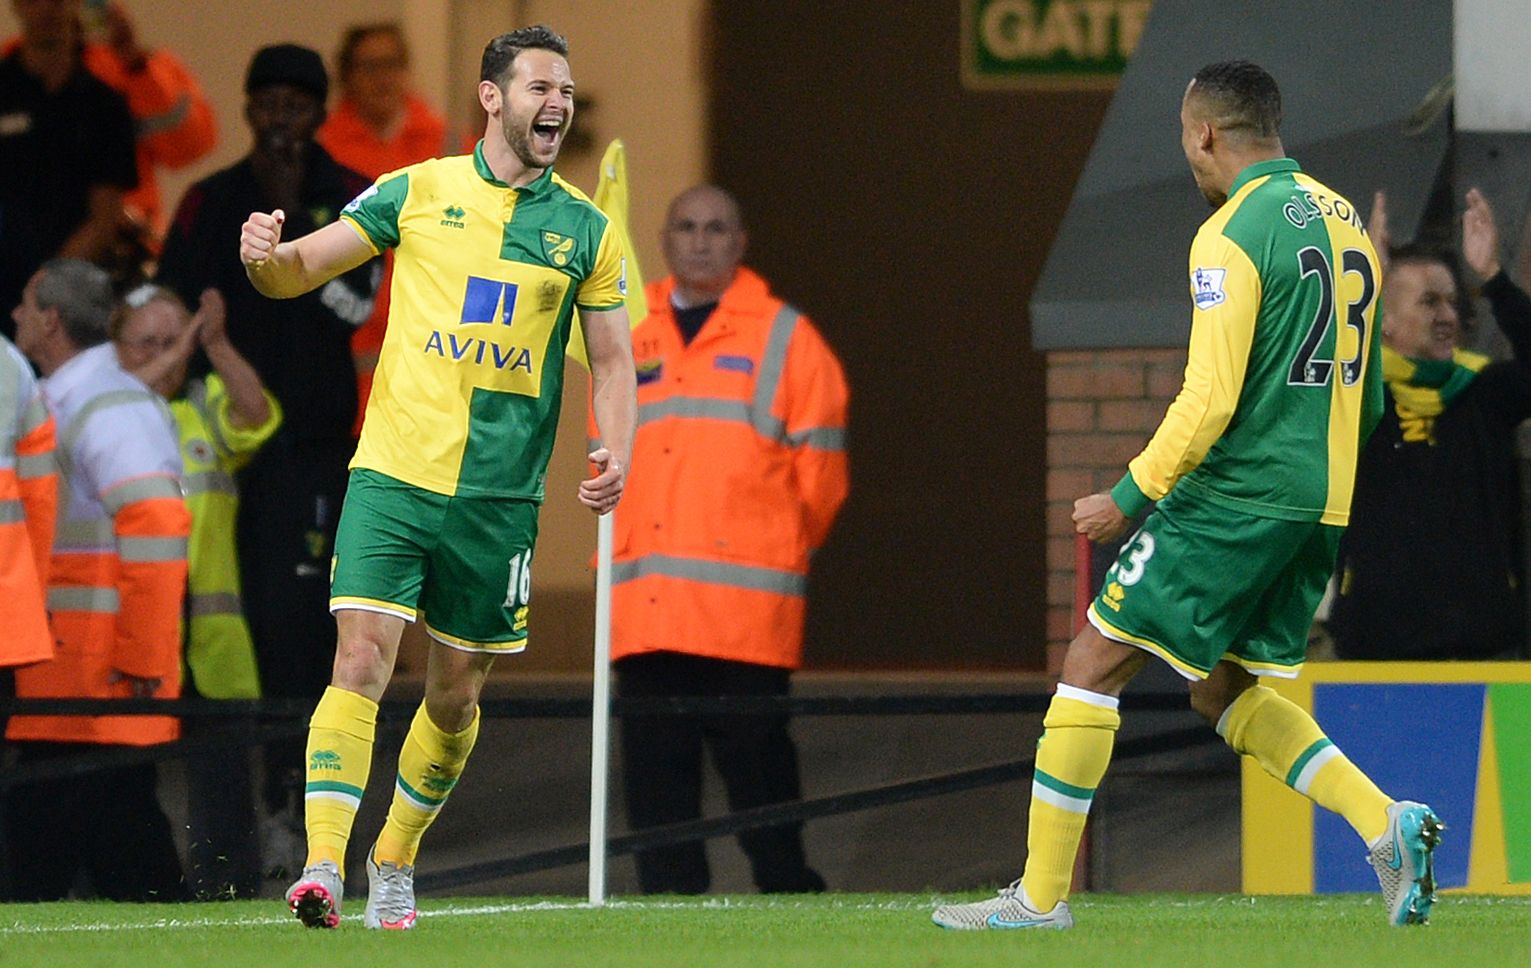 Football - Norwich City v West Bromwich Albion - Capital One Cup Third Round - Carrow Road - 23/9/15 
Norwich's Matt Jarvis celebrates scoring their first goal 
Mandatory Credit: Action Images / Alan Walter 
Livepic 
EDITORIAL USE ONLY. No use with unauthorized audio, video, data, fixture lists, club/league logos or 